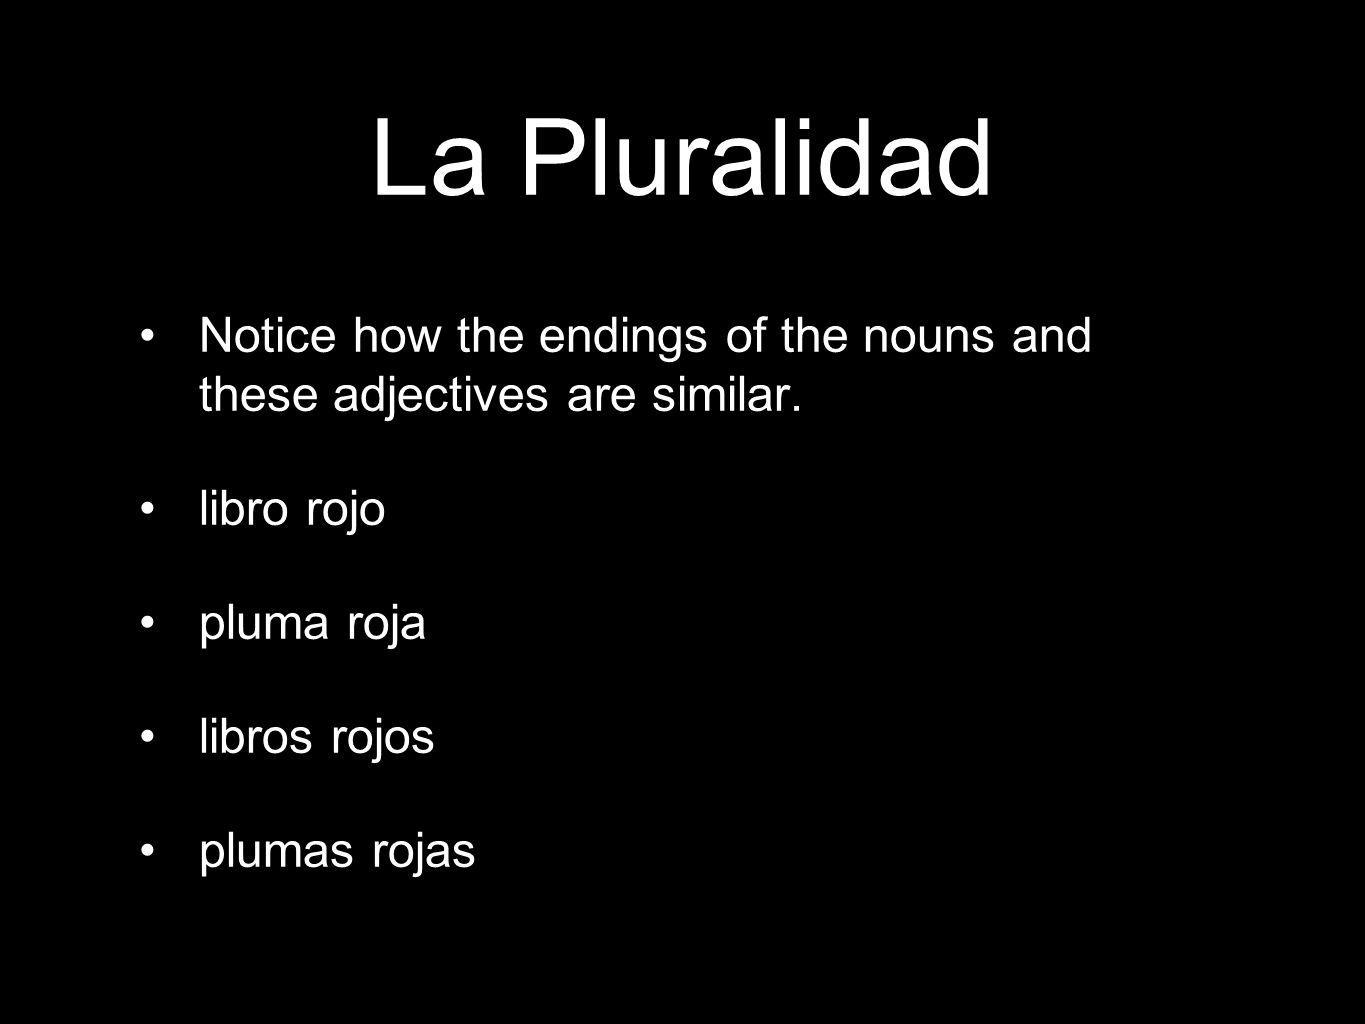 La Pluralidad Notice how the endings of the nouns and these adjectives are similar.